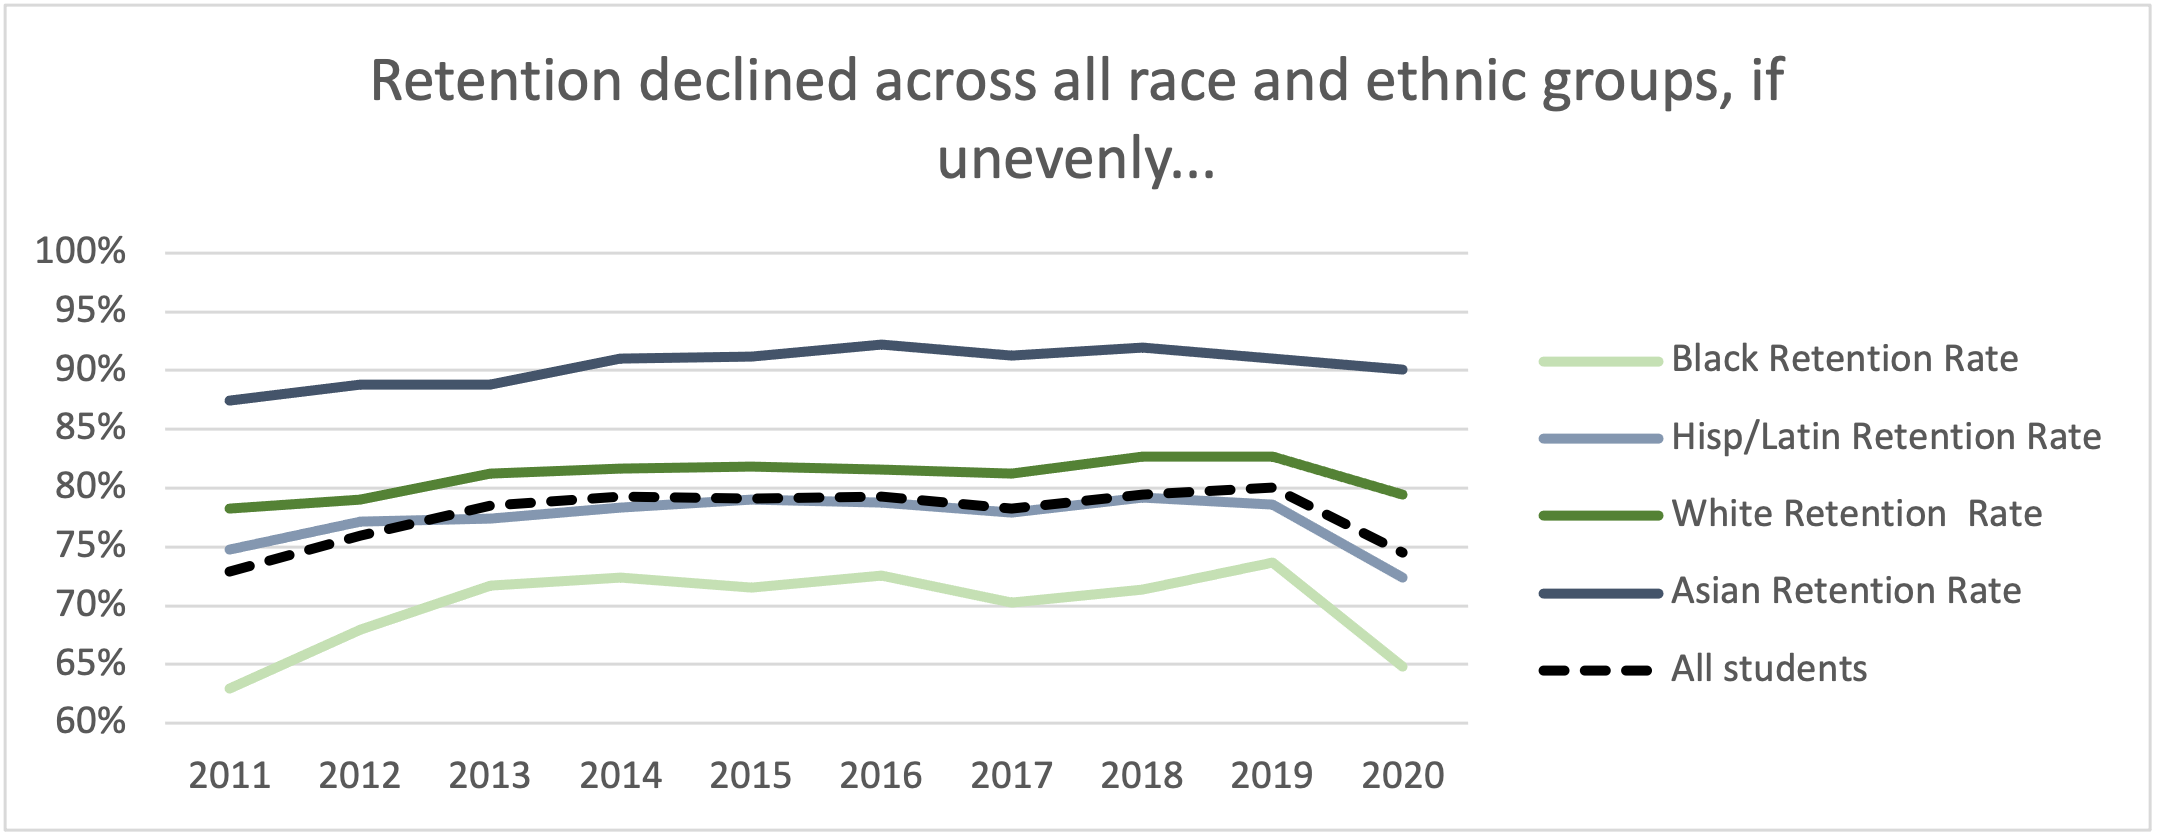 Retention declined across all race and ethnicity categories